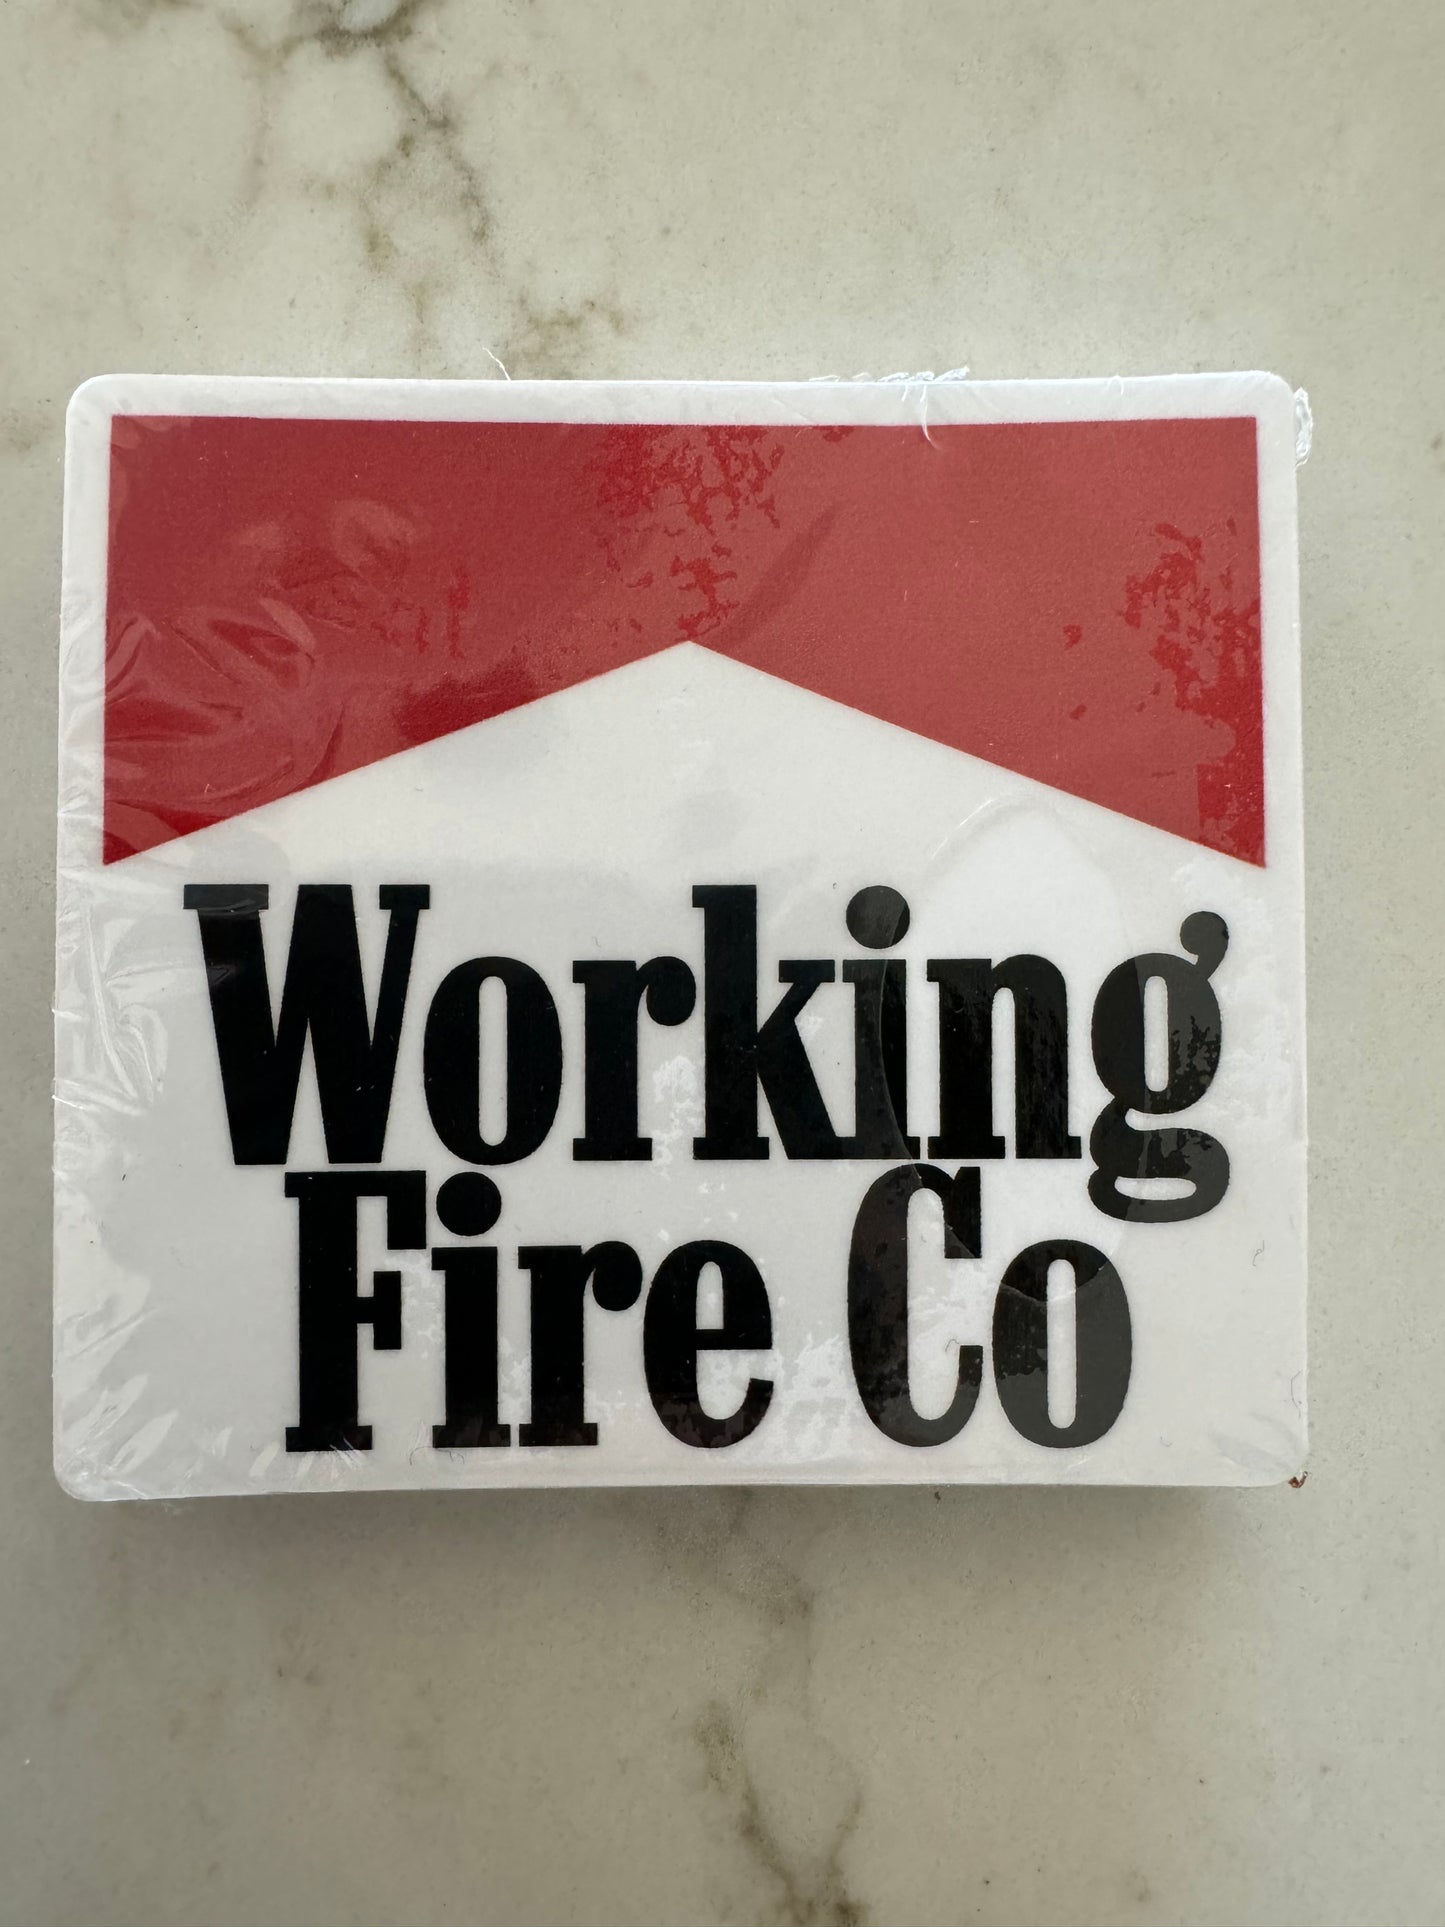 Working Fire Co